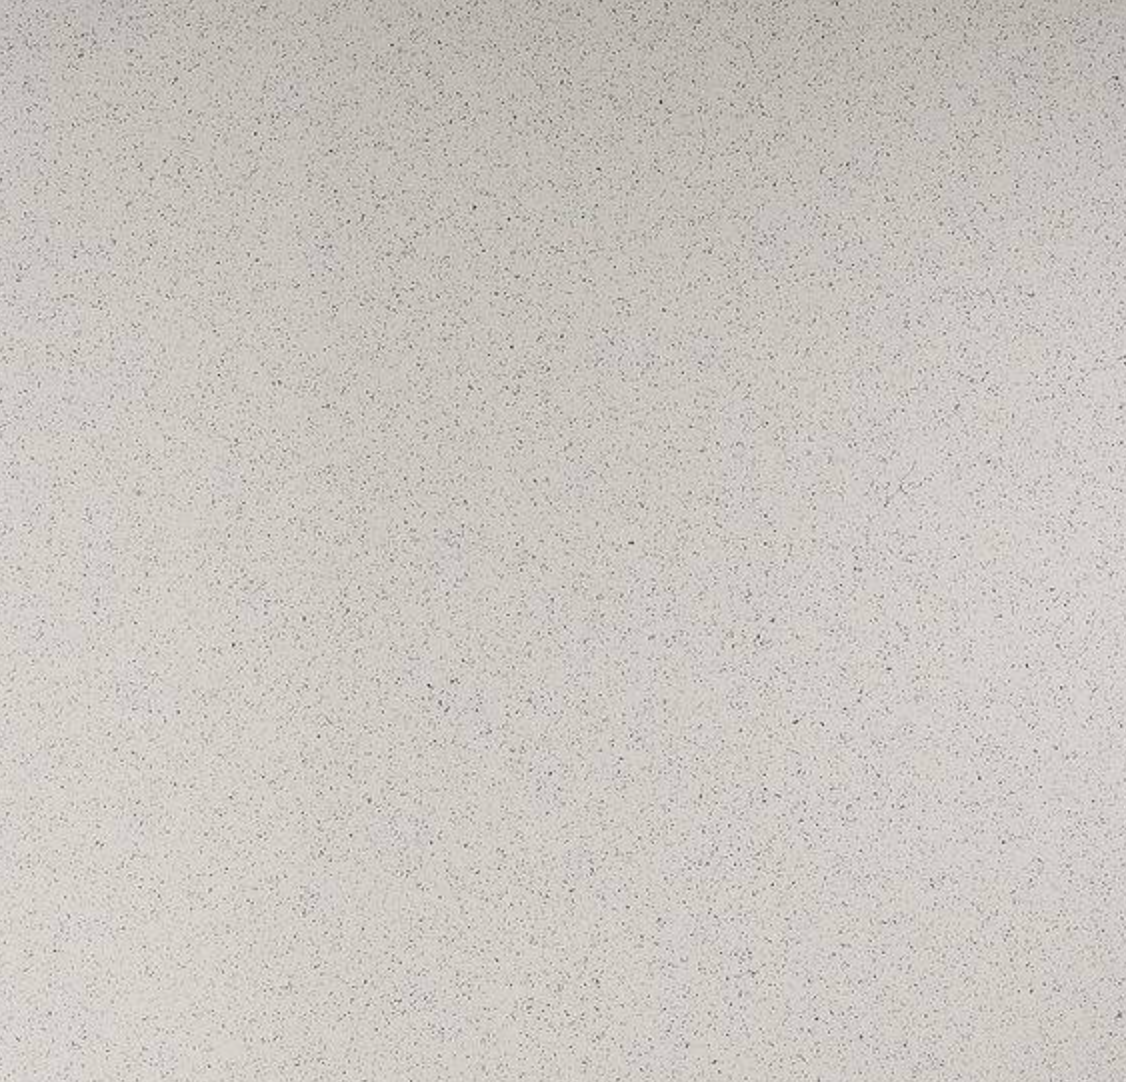 Showerwall Laminate Mineral Collection - White Galaxy